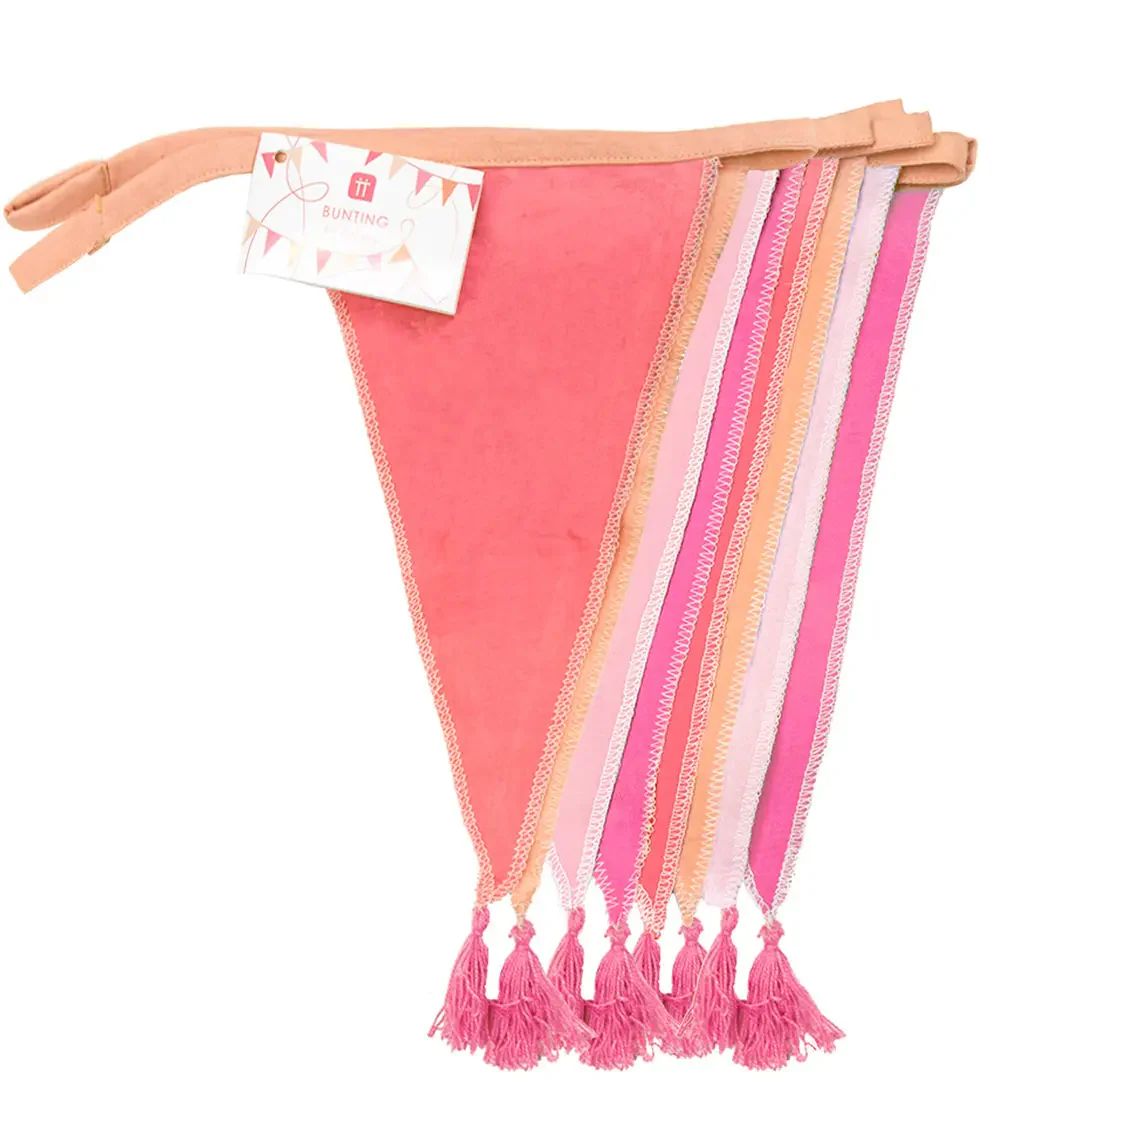 Pink Fabric Bunting Decoration | Ellie and Piper